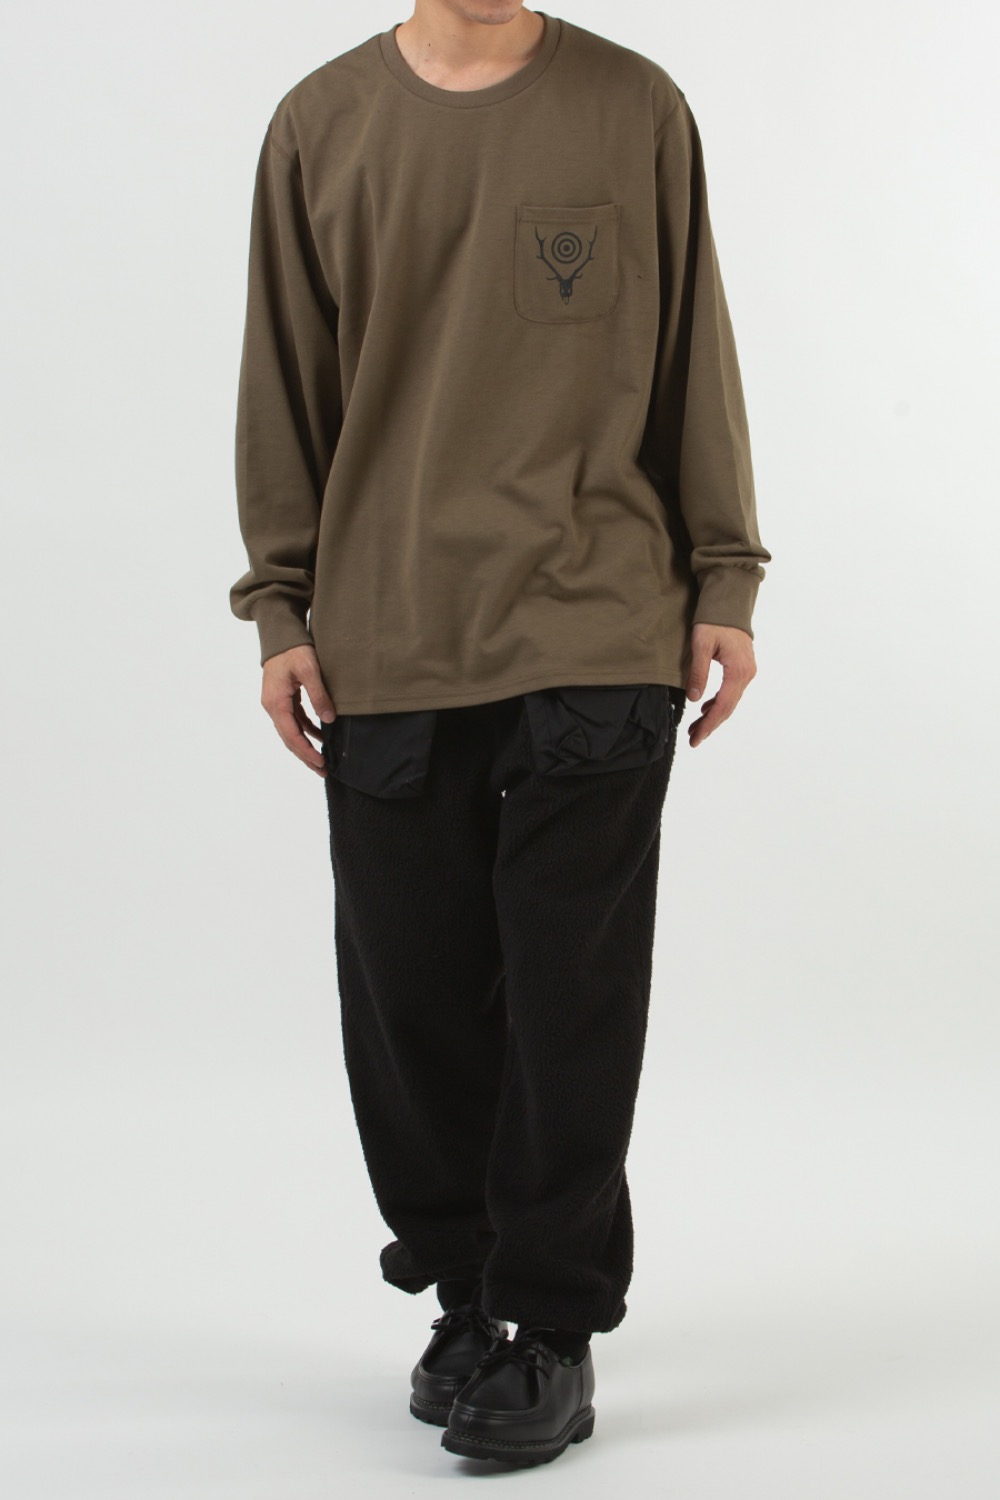 SOUTH2 WEST8 L/S ROUND POCKET TEE - CIRCLE HORN OLIVE